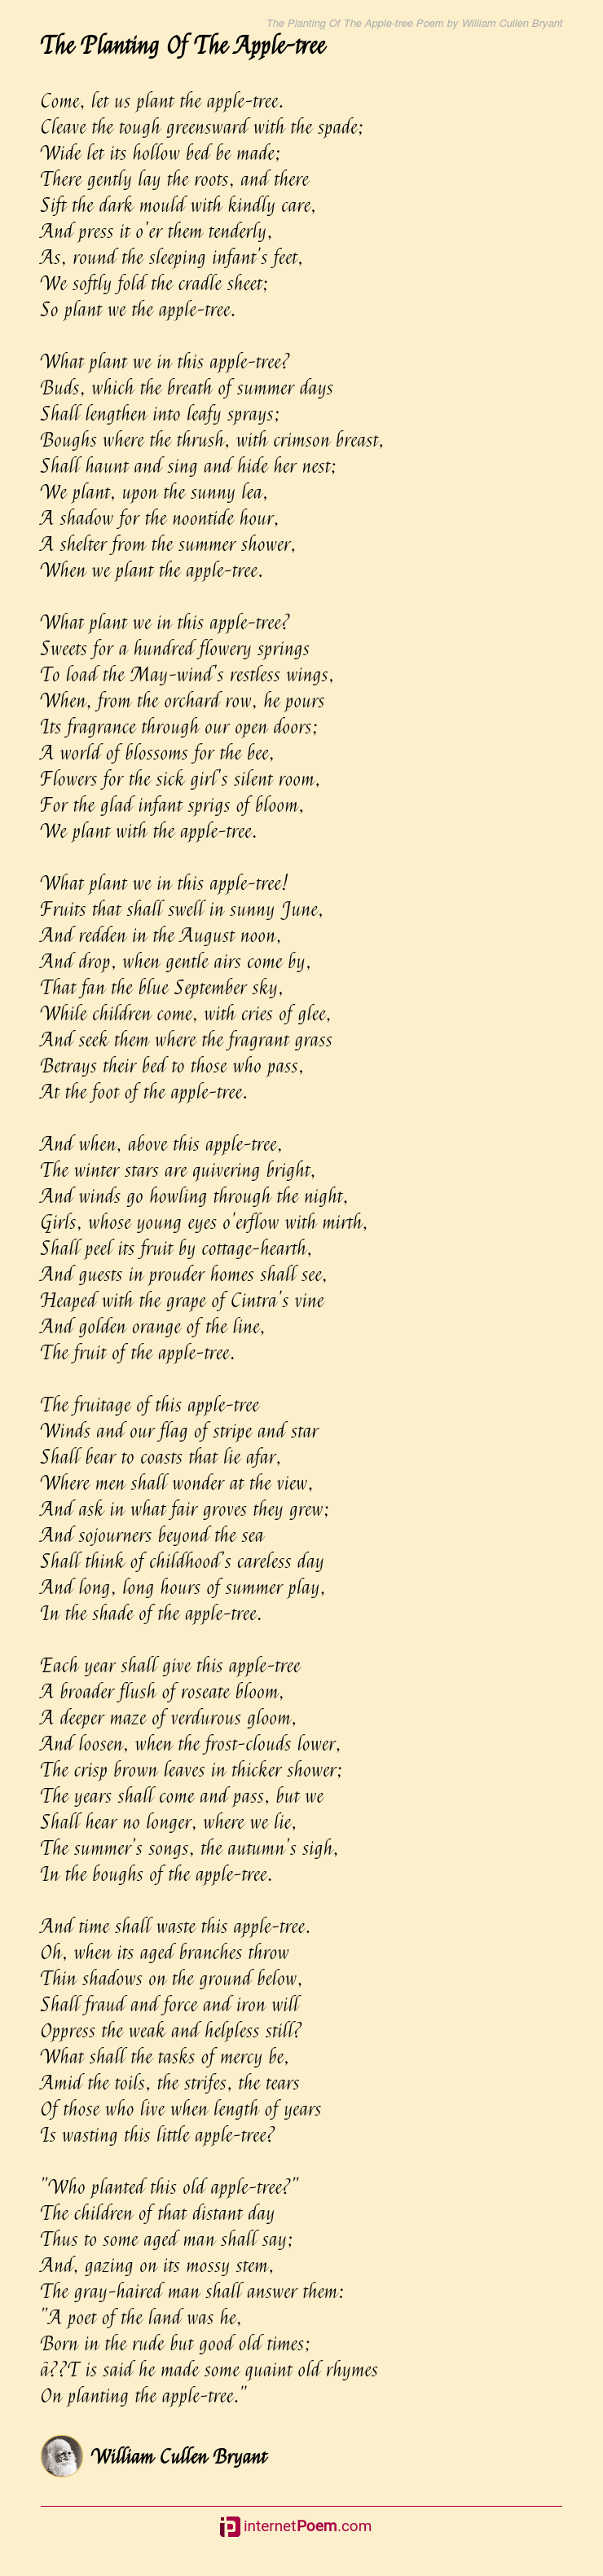 The Planting Of The Apple Tree Poem By William Cullen Bryant 7606